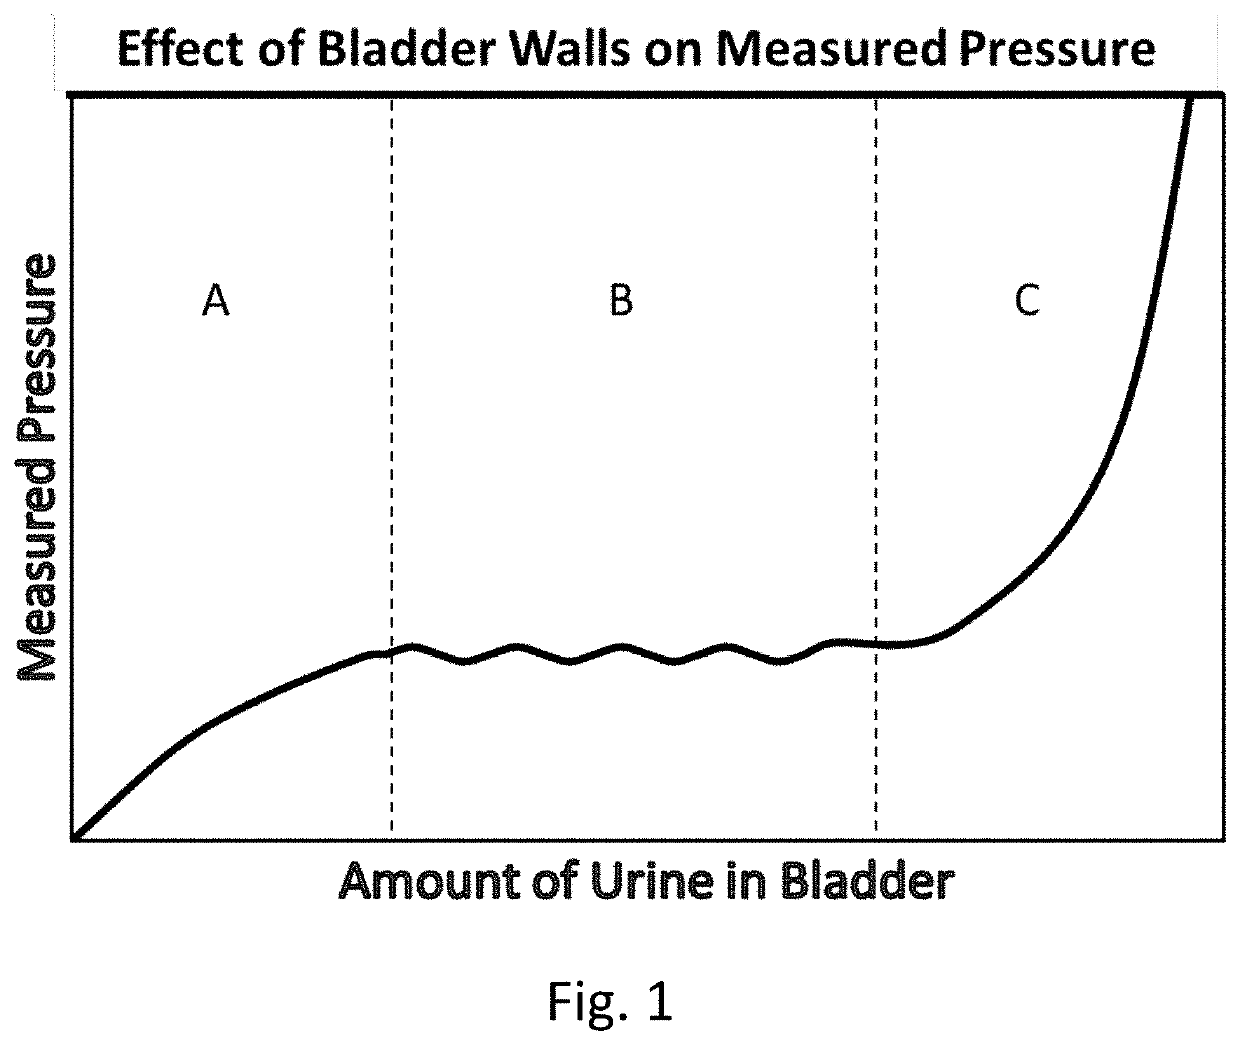 Apparatus and method of monitoring intra-abdominal pressure and urine output